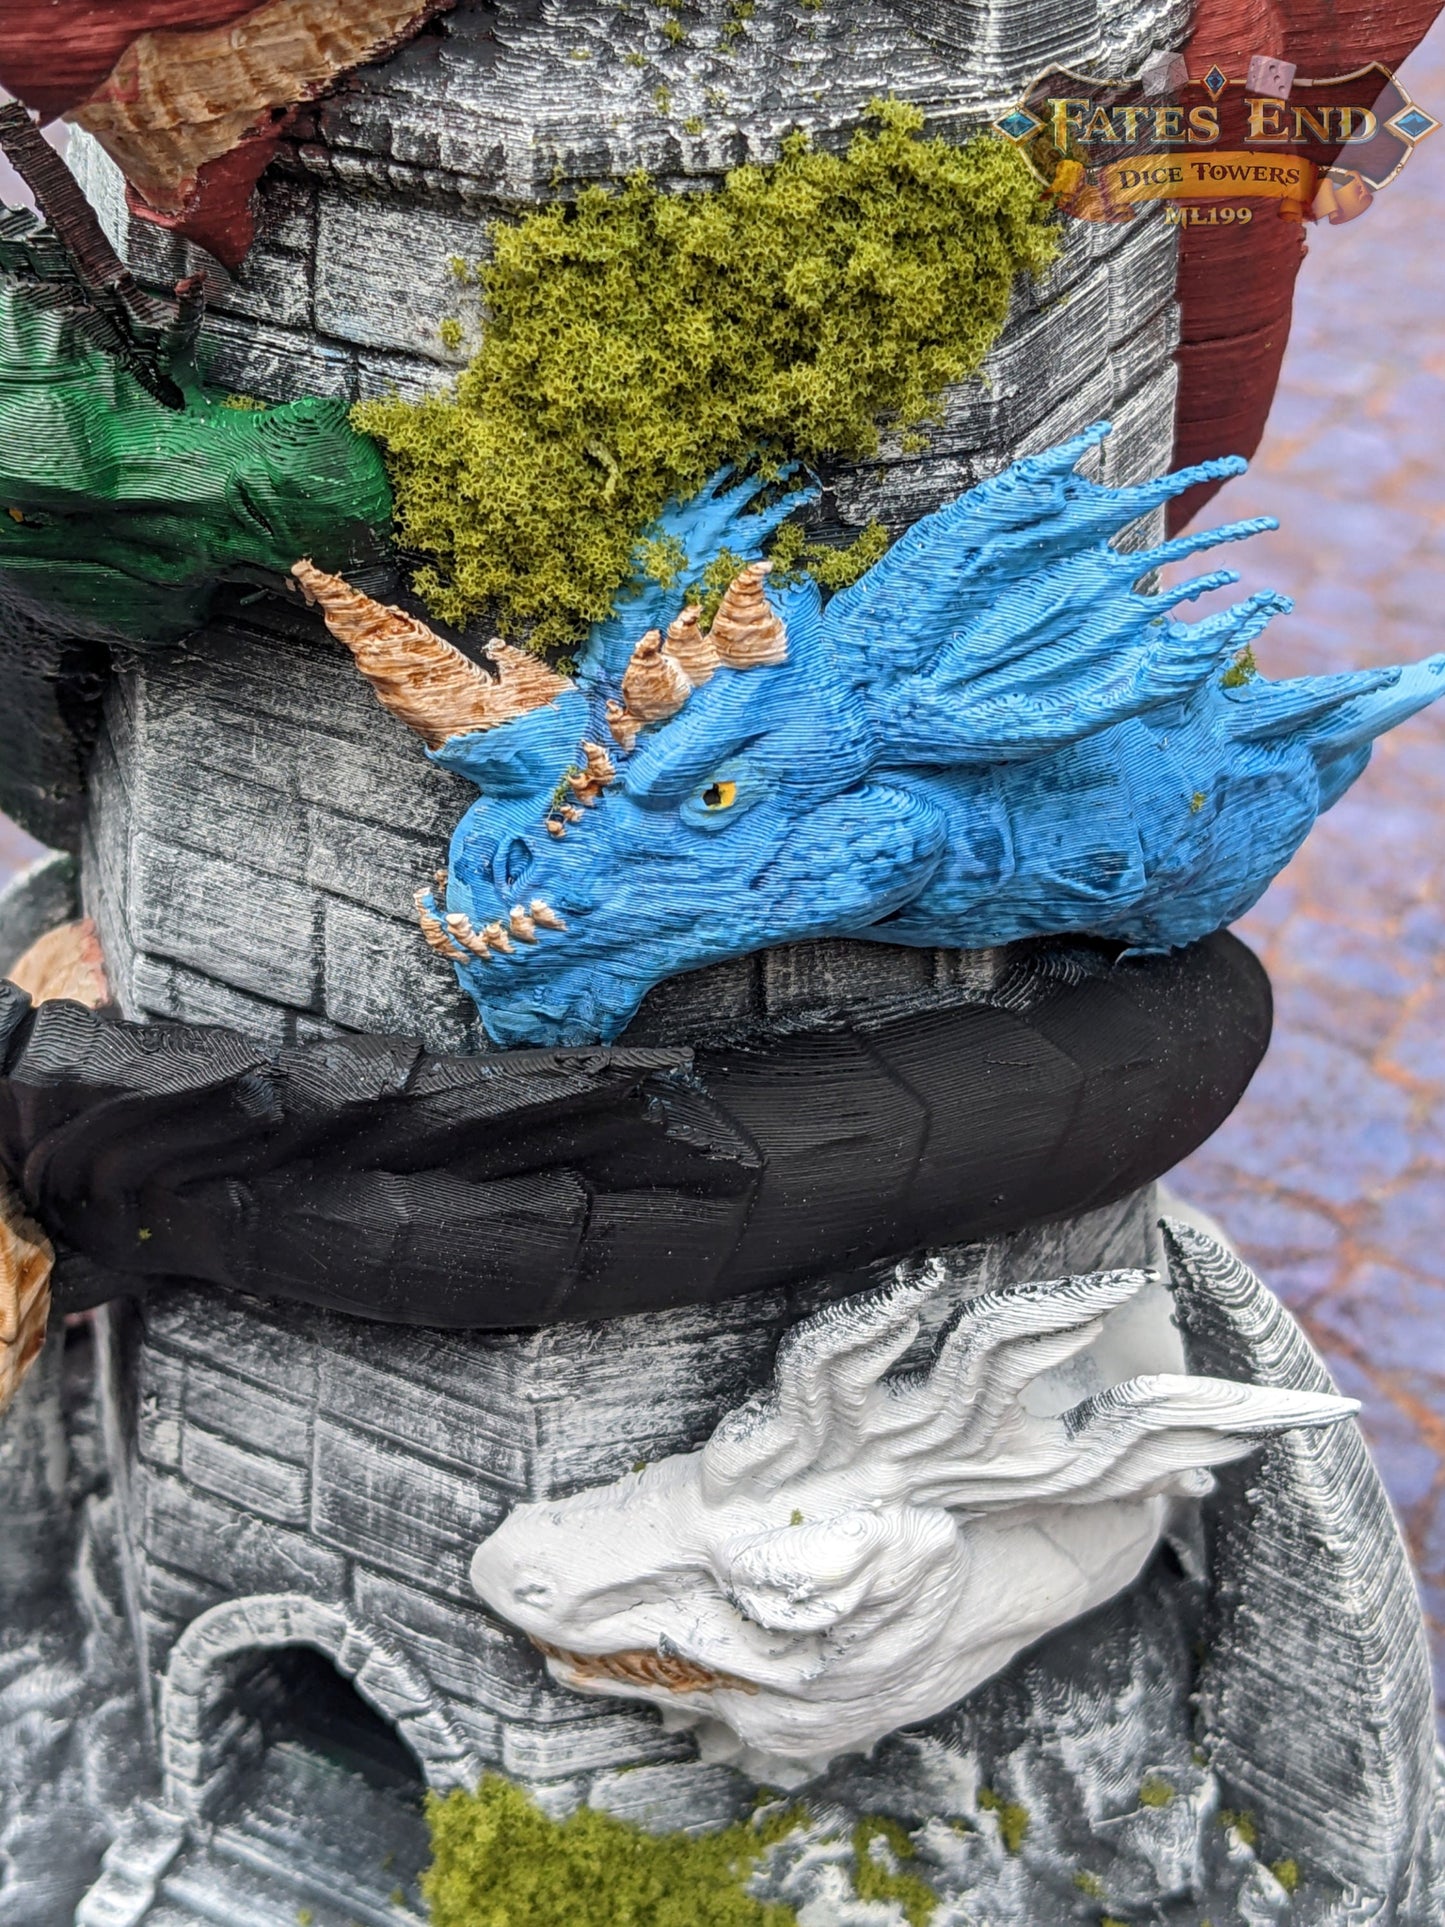 Tiamat 3D Printed Dice Tower - Fate's End Collection - Tabletop RPG Gaming Fantasy Cosplay - Dungeons and Dragon DnD D&D Wargaming.